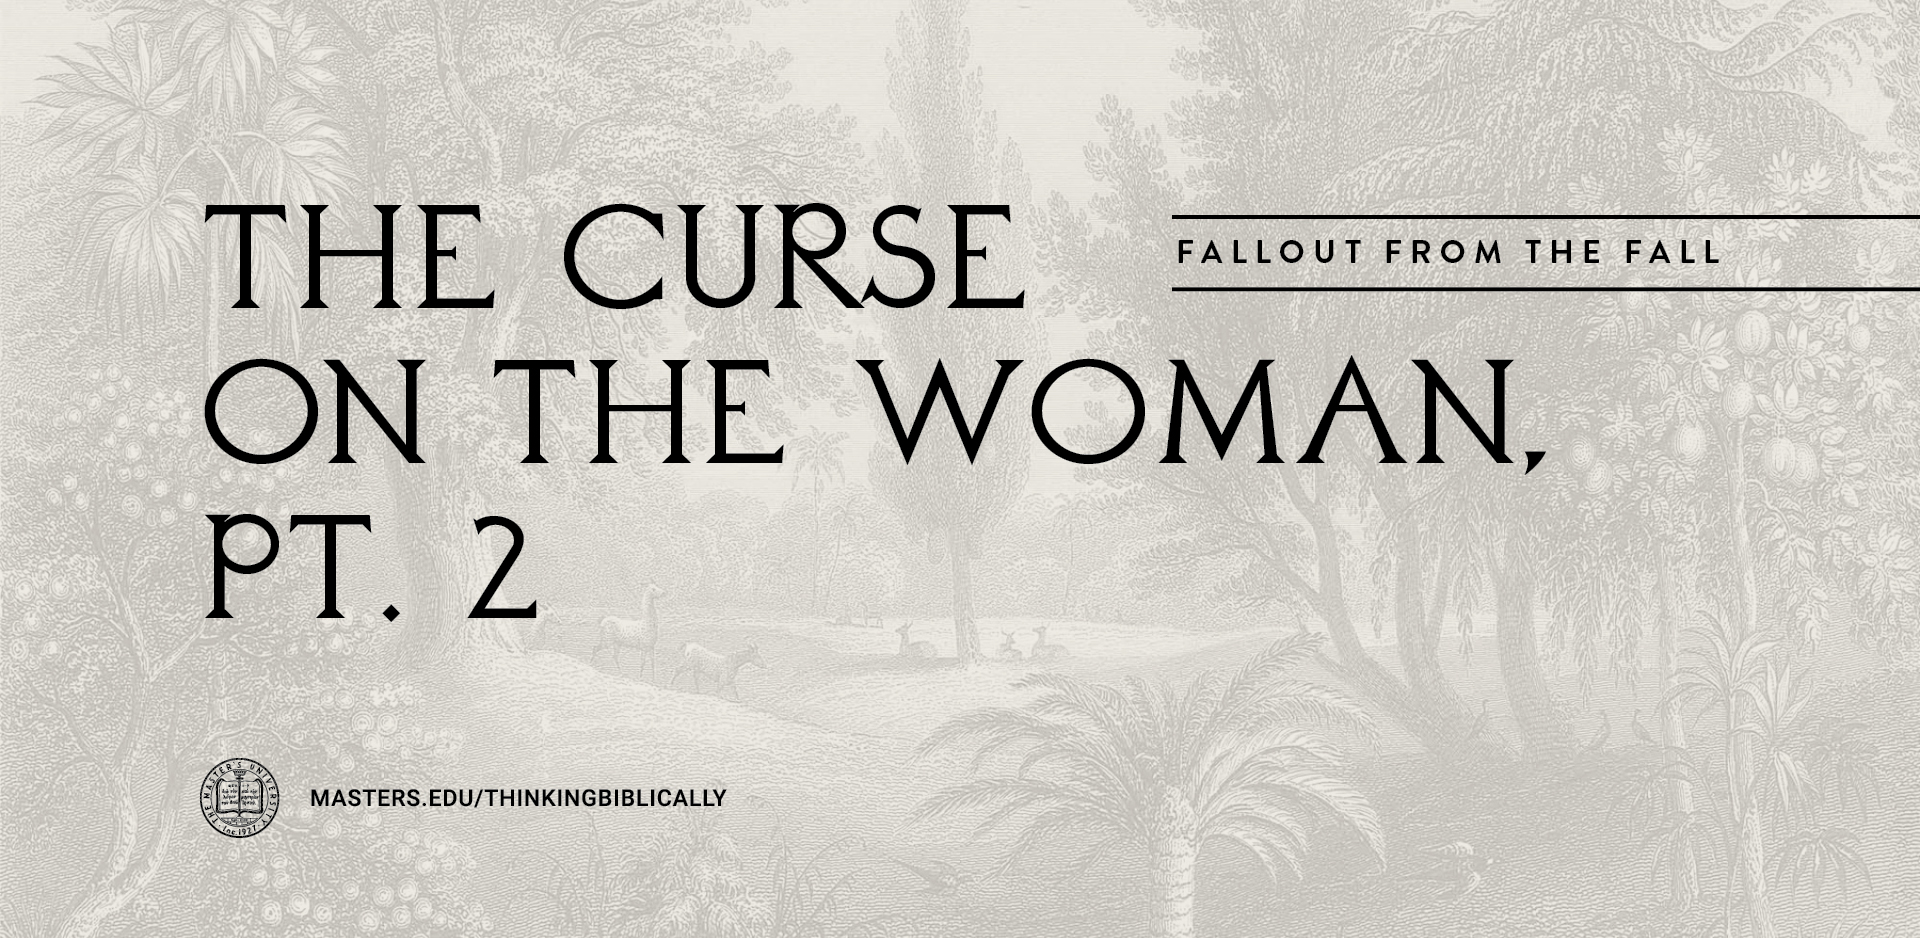 The Curse on the Woman, Pt. 2 Featured Image